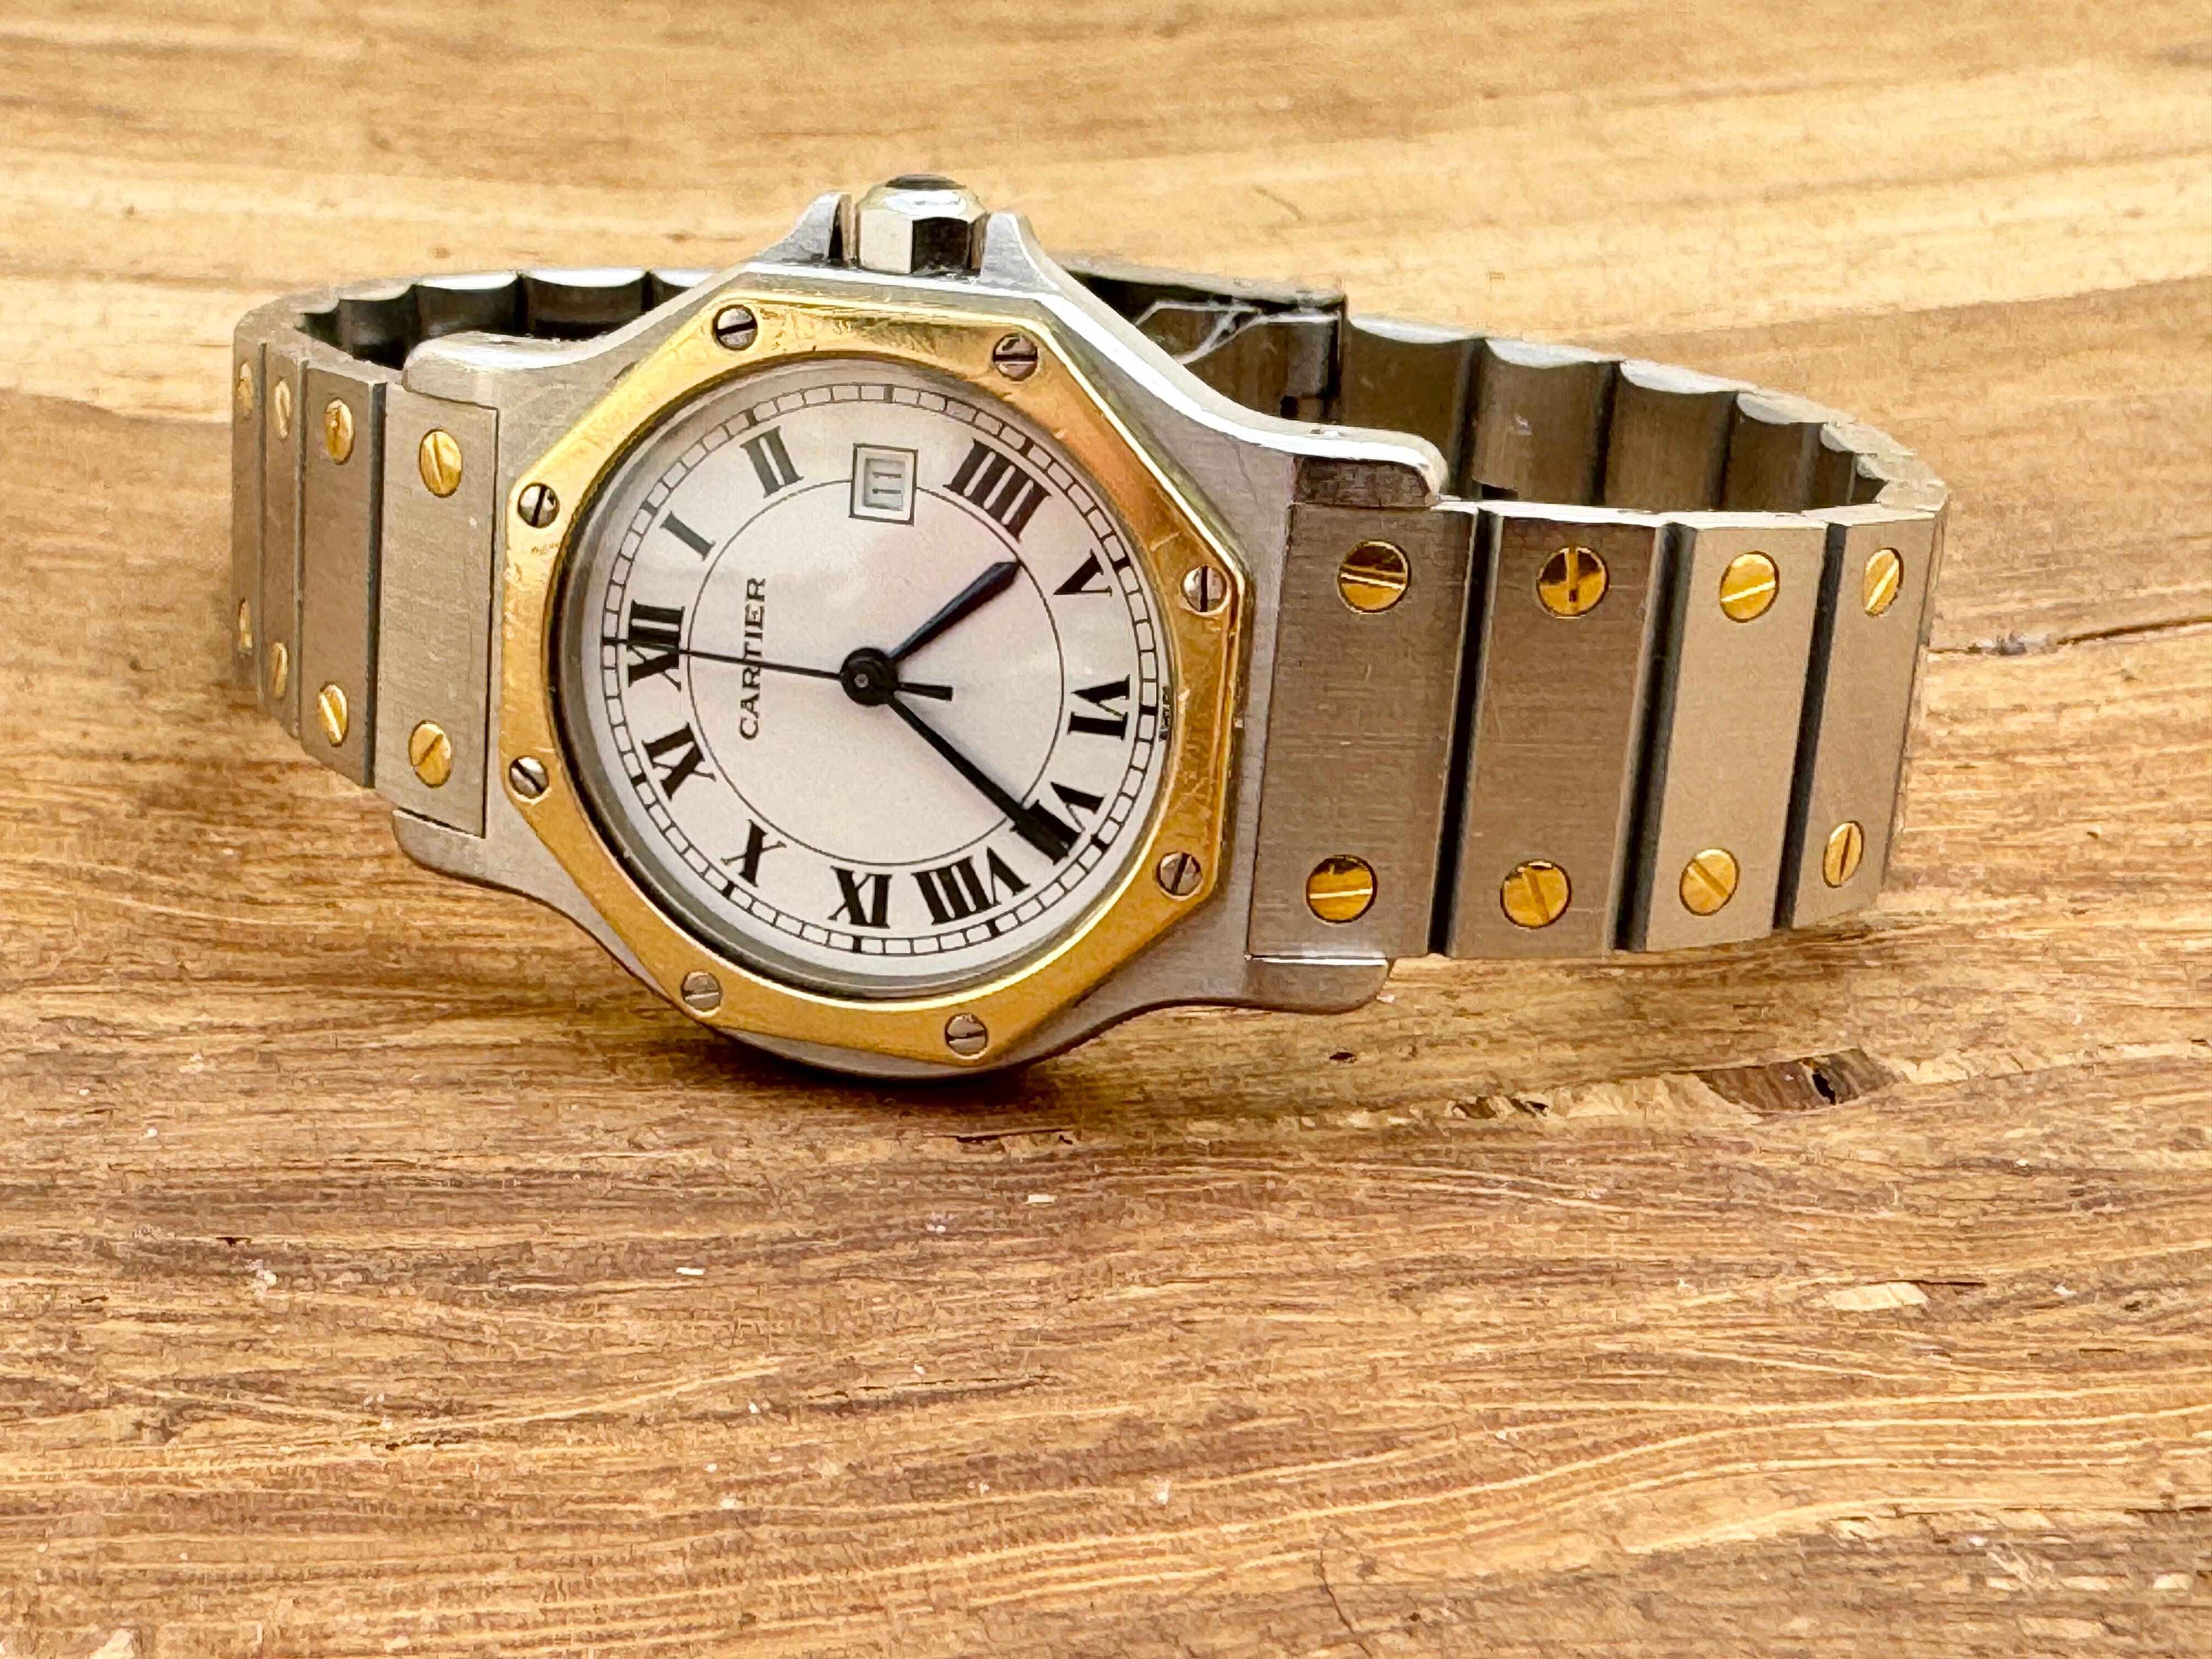 Brand : Cartier

Model: Santos Octagon

Reference: 29662

Country Of Manufacture: Switzerland

Movement: Automatic

Case Material: Stainless Steel/Gold

Measurements :30mm diameter (excluding crown )

Band Type : Stainless Steel/Gold with Marked